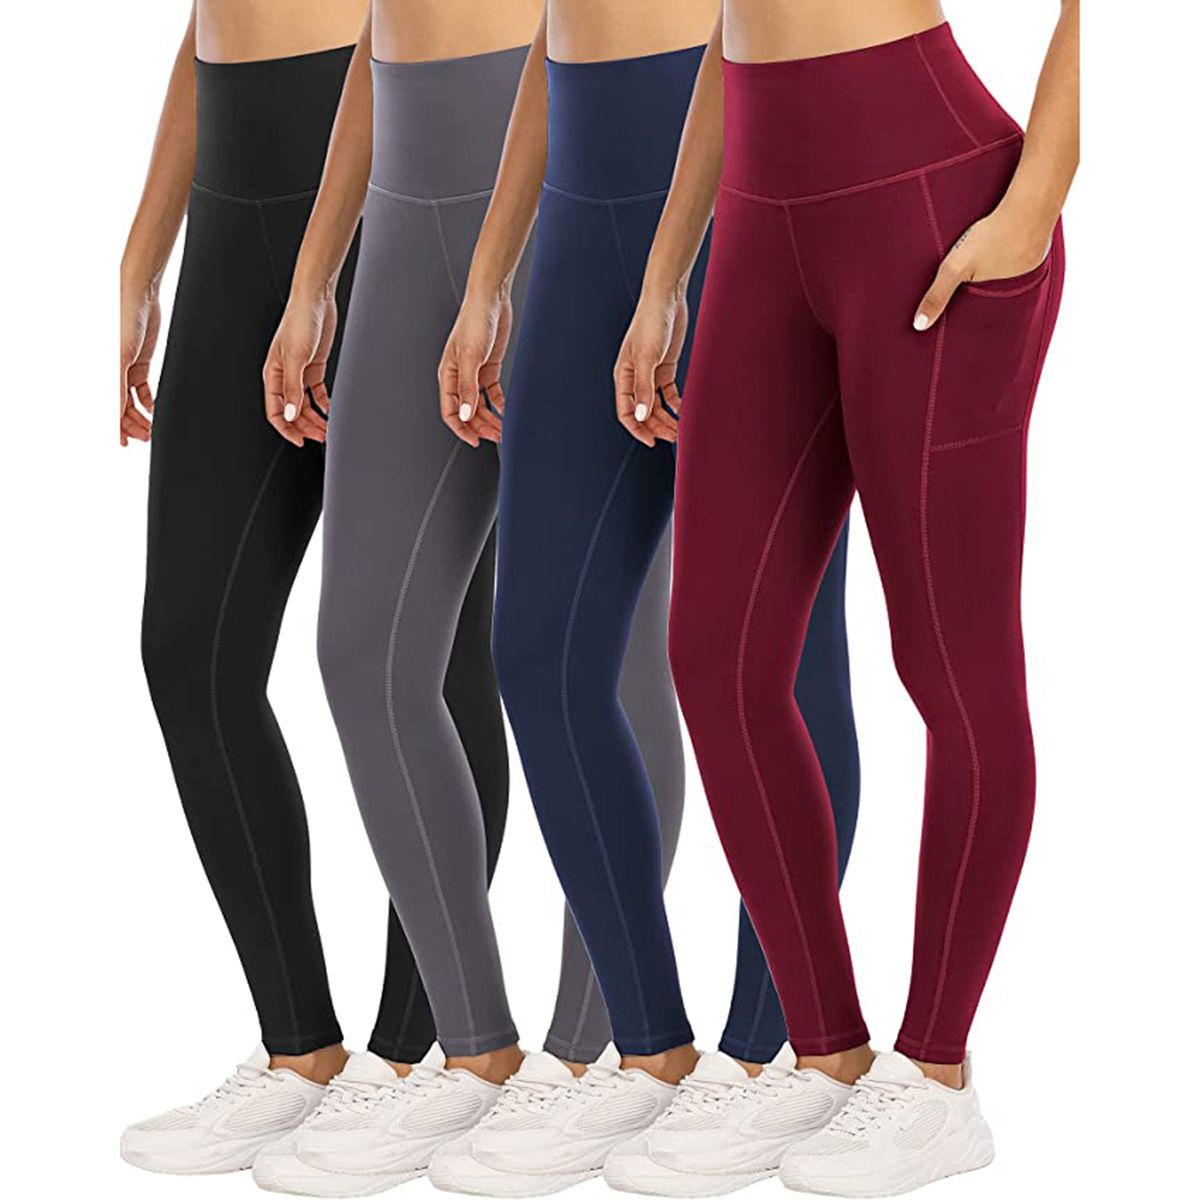 YOUNGCHARM 4 Pack Leggings with Pockets for Women,